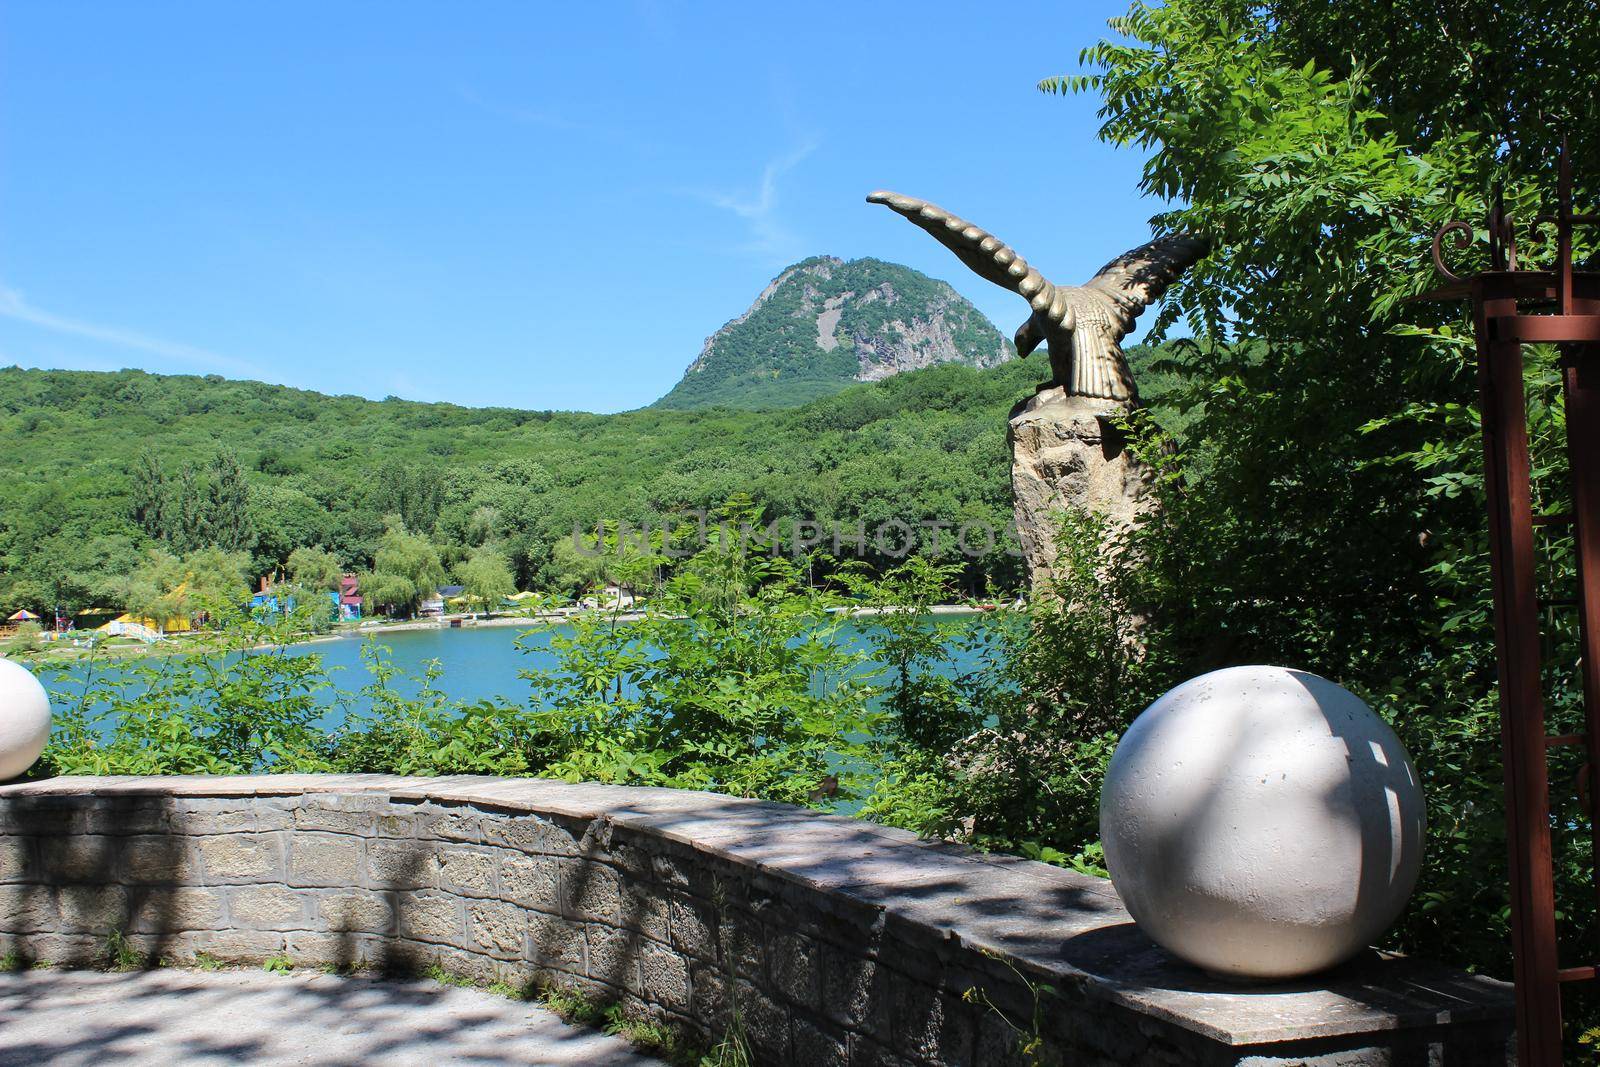 A decorative lake overlooking the mountain in the park.